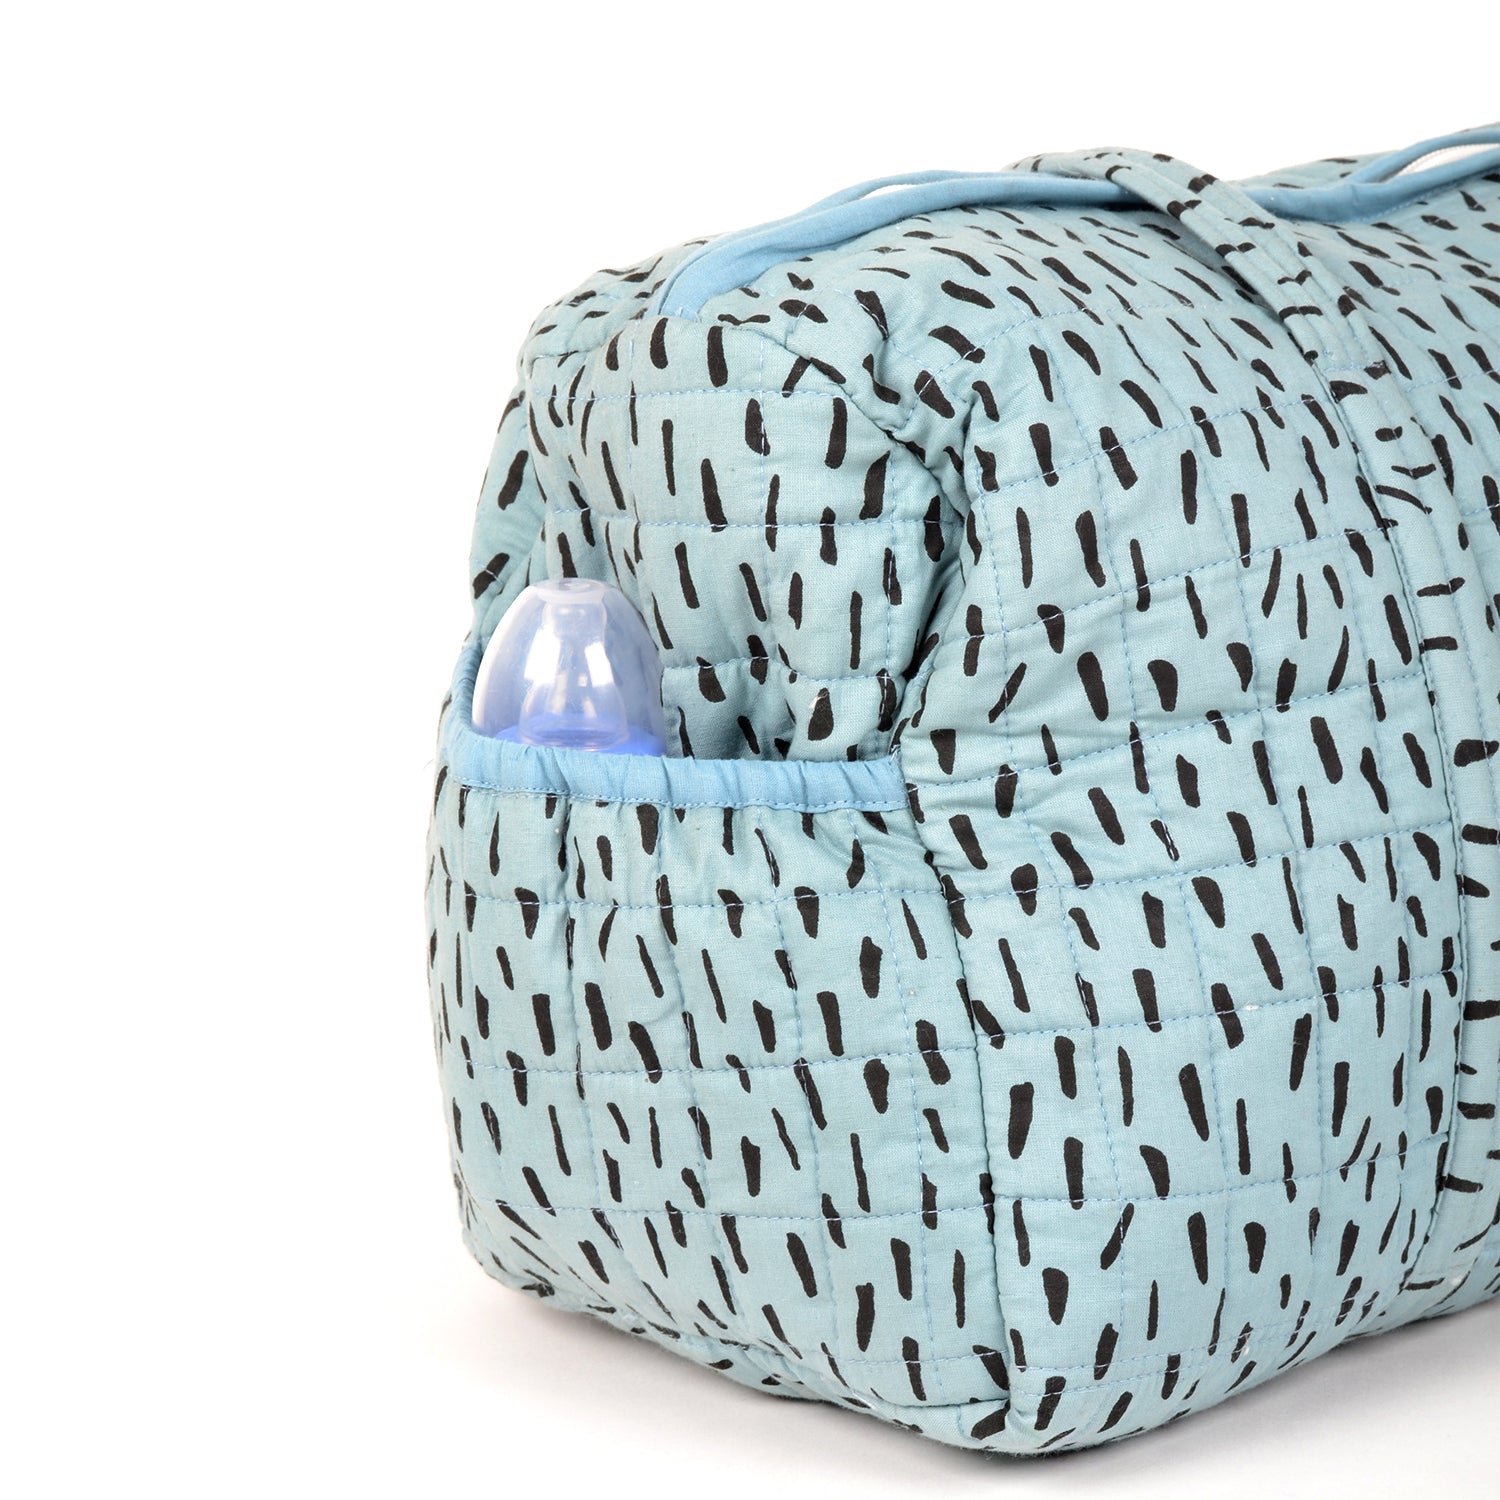 MOM'S HOME BABY ORGANIC COTTON DIAPER CARRY BAGS FOR MOTHERS -BLUE DIAPER CARRY BAG